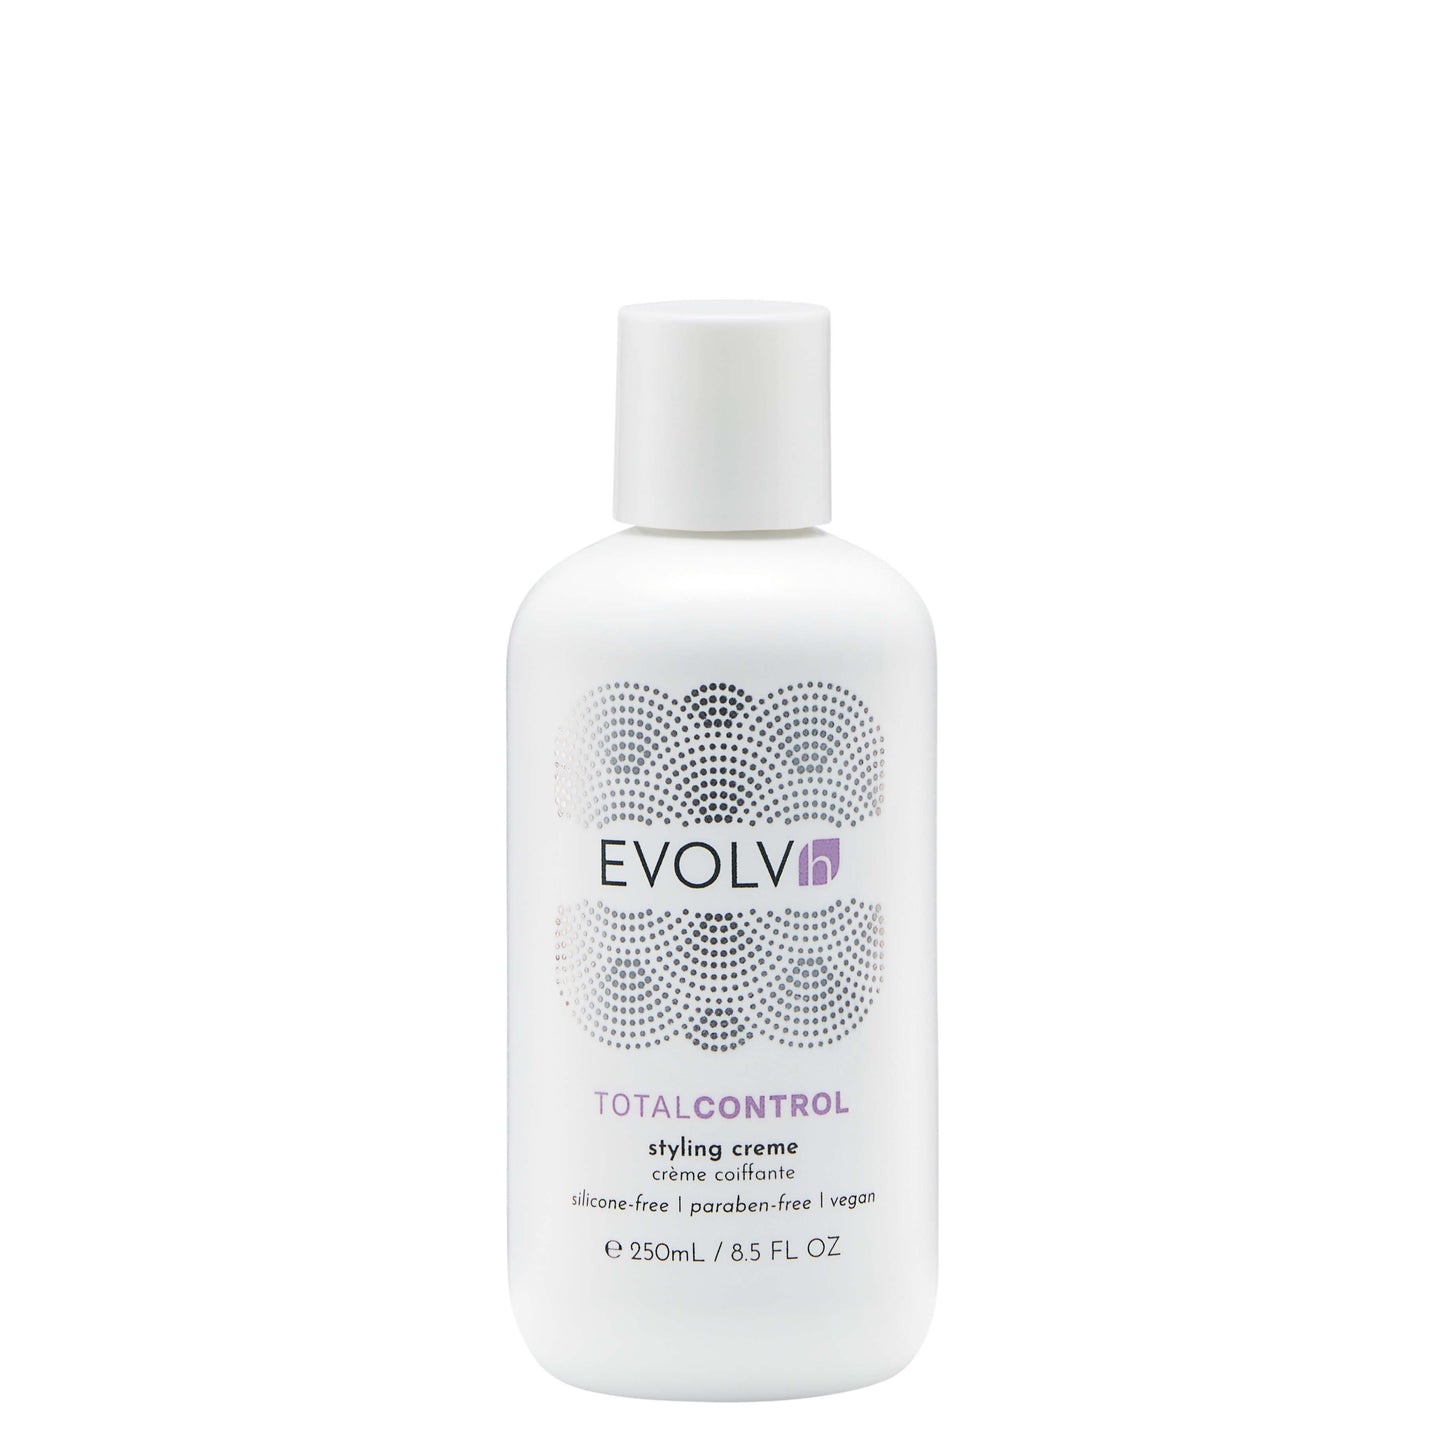 EVOLVH TotalControl Styling Crème full size